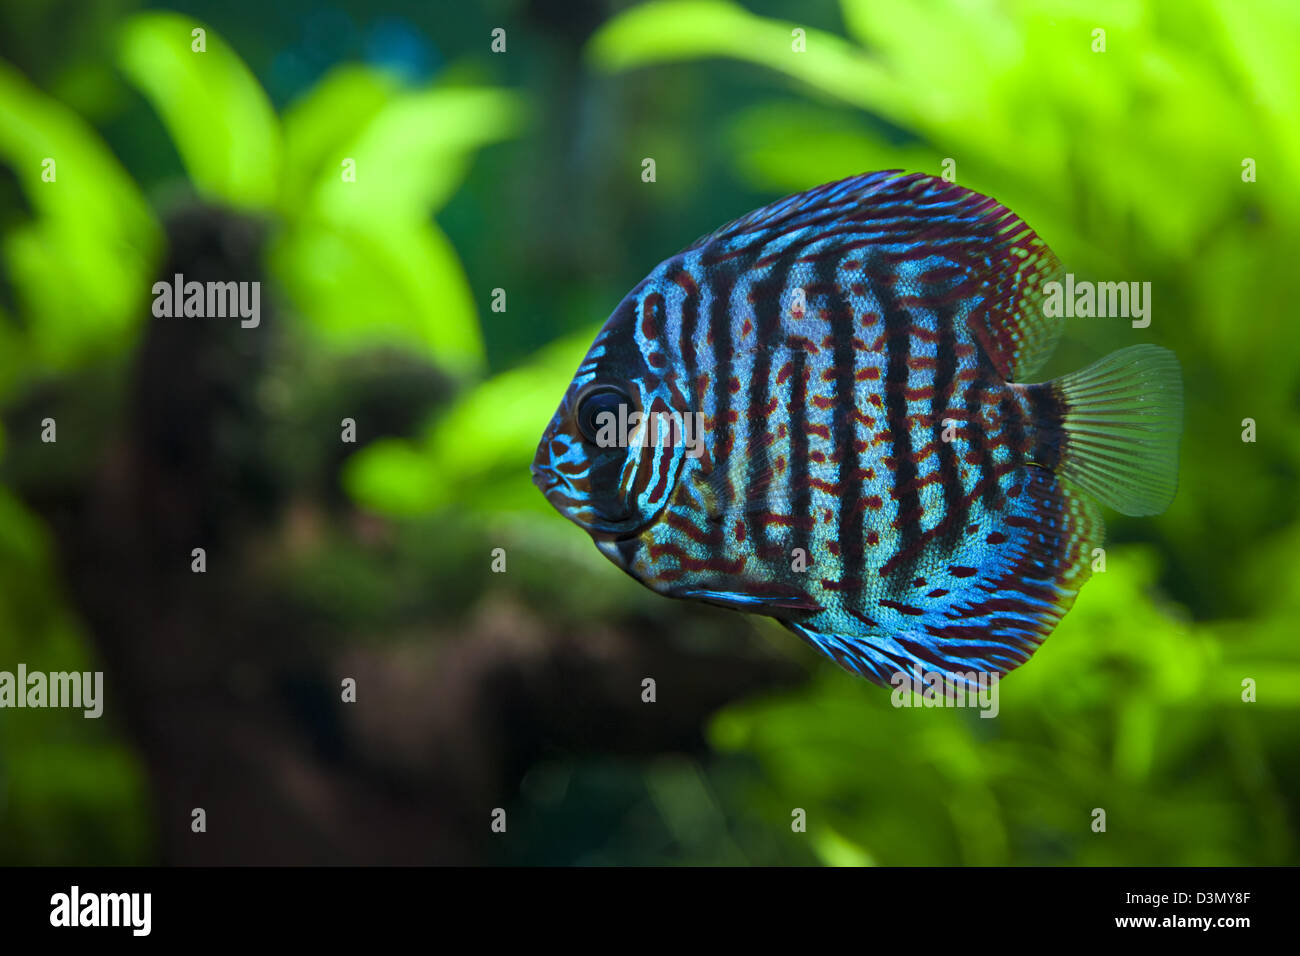 A colorful close up shot of a Discus Fish Stock Photo